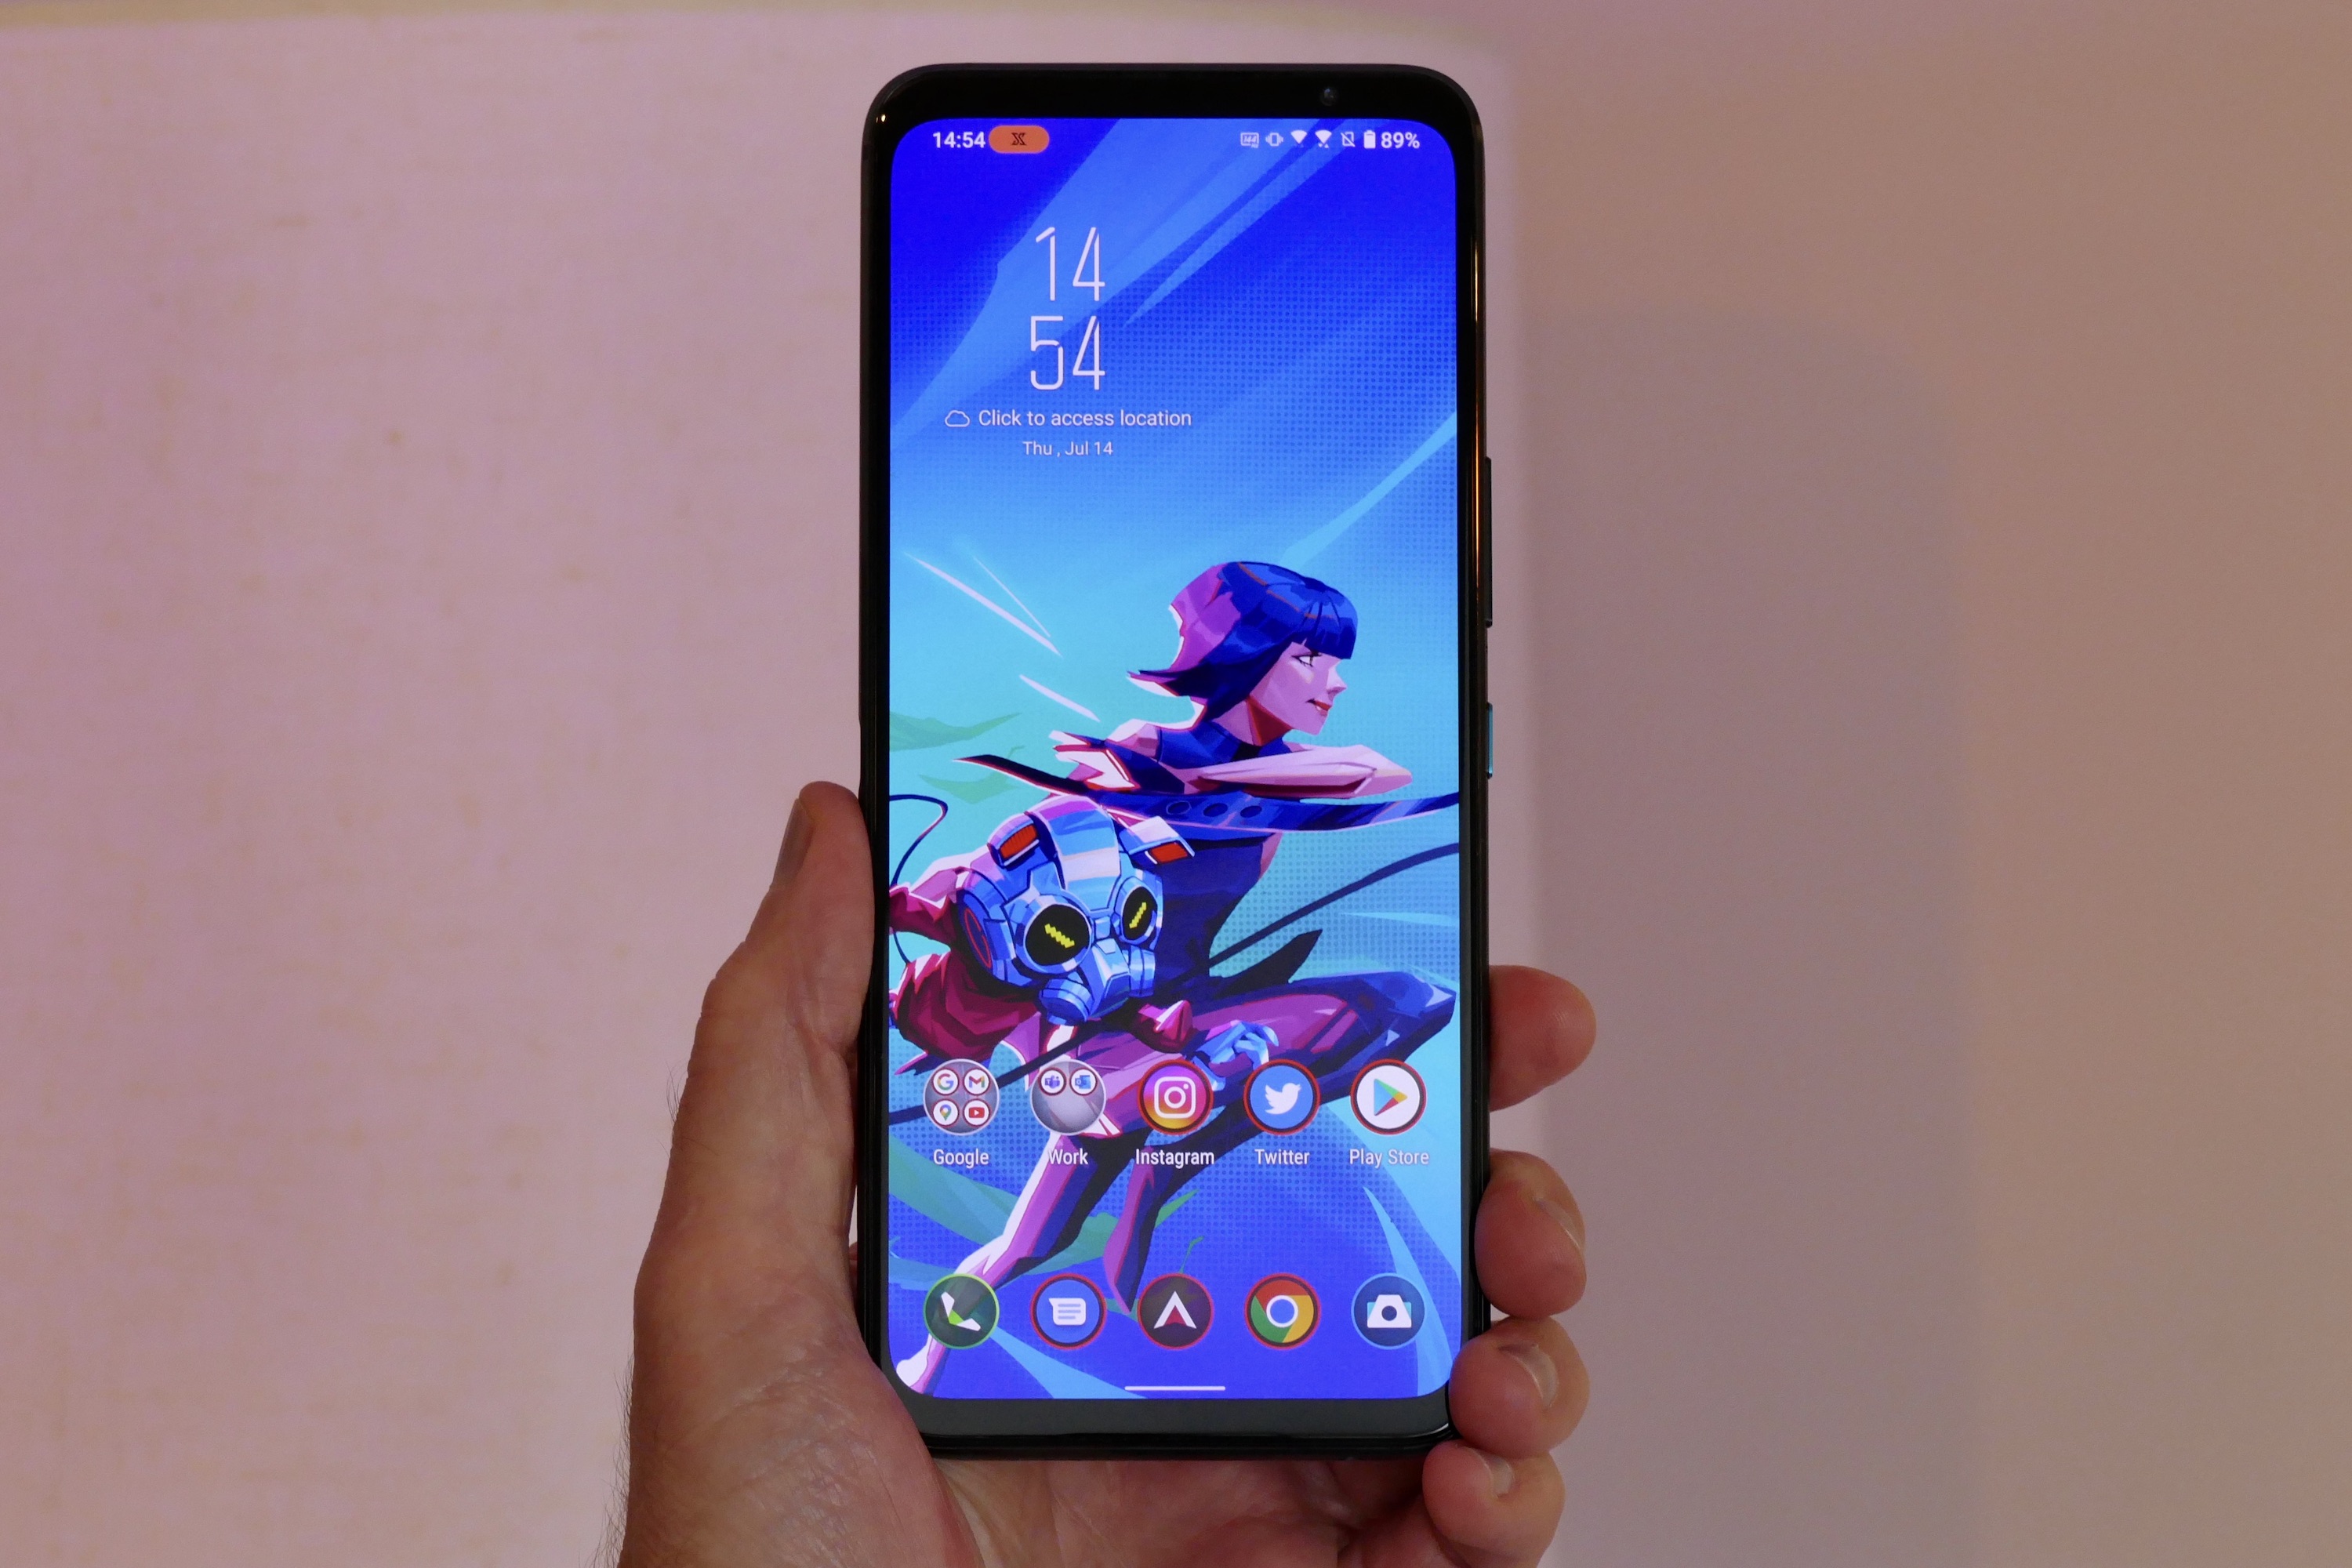 Asus ROG Phone review: The Asus ROG phone costs $900 and has actual buttons  for games - CNET